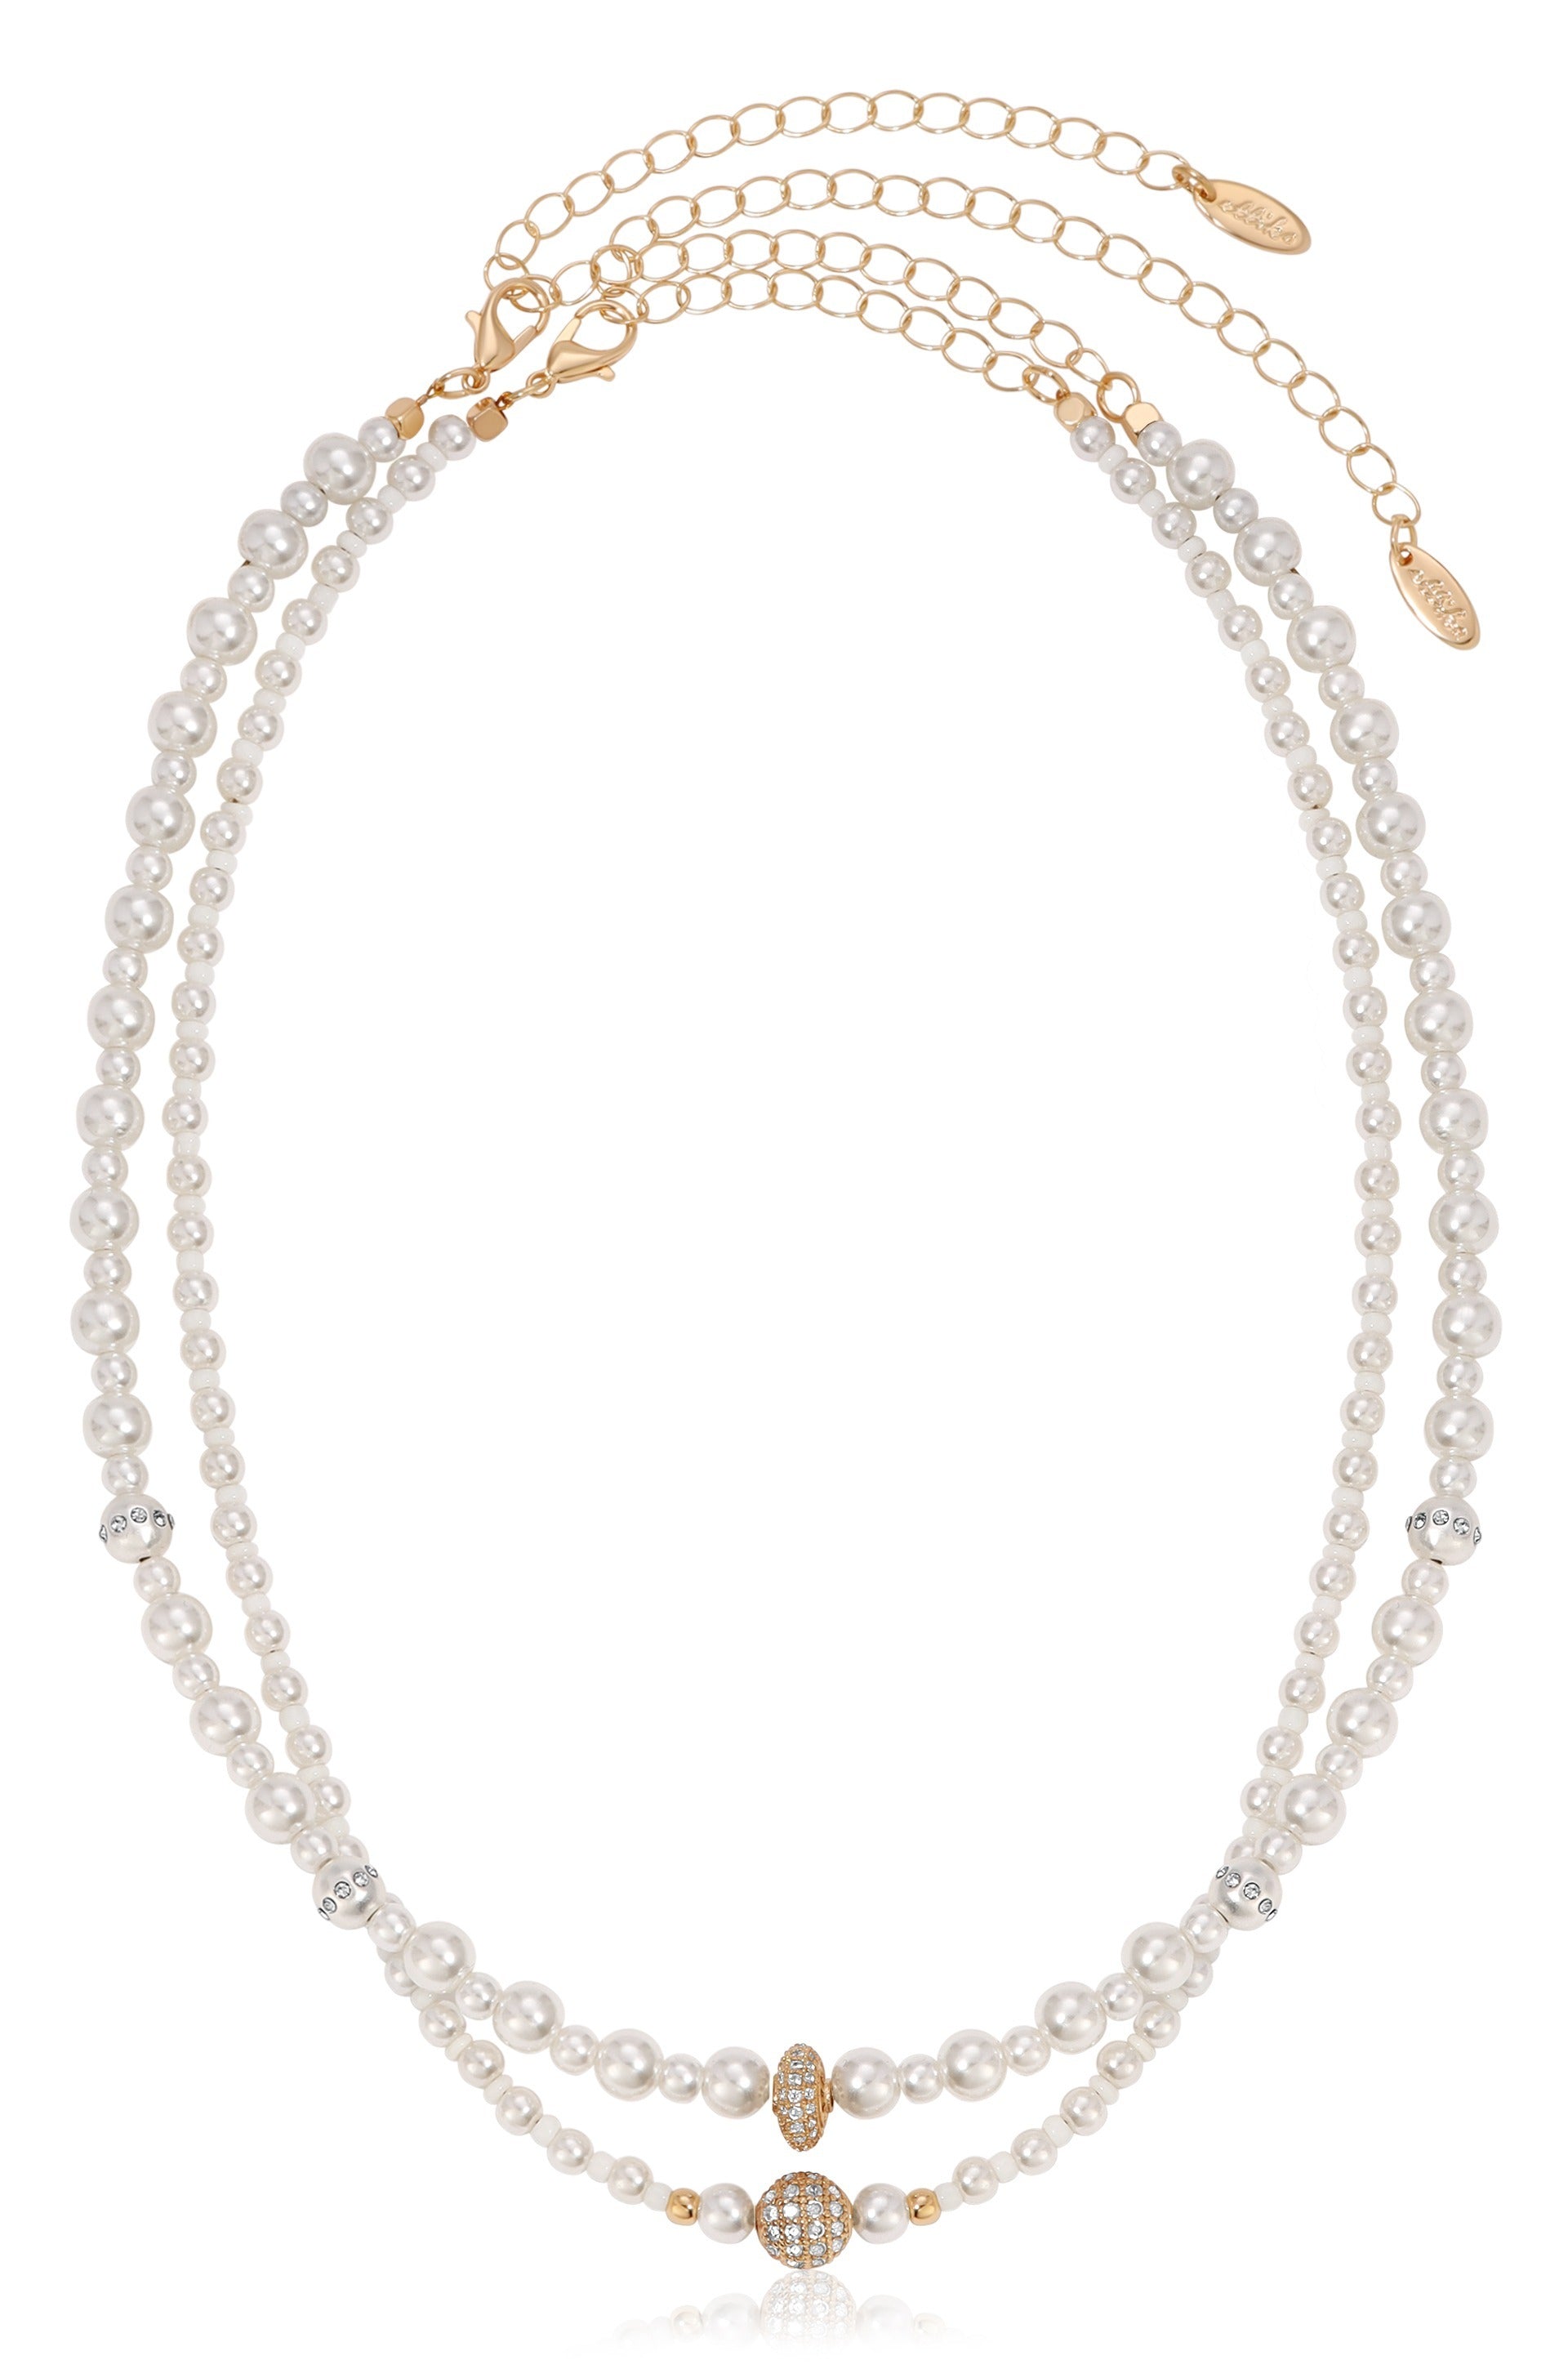 Double Pearl Chain 18k Gold Plated Necklace Set close